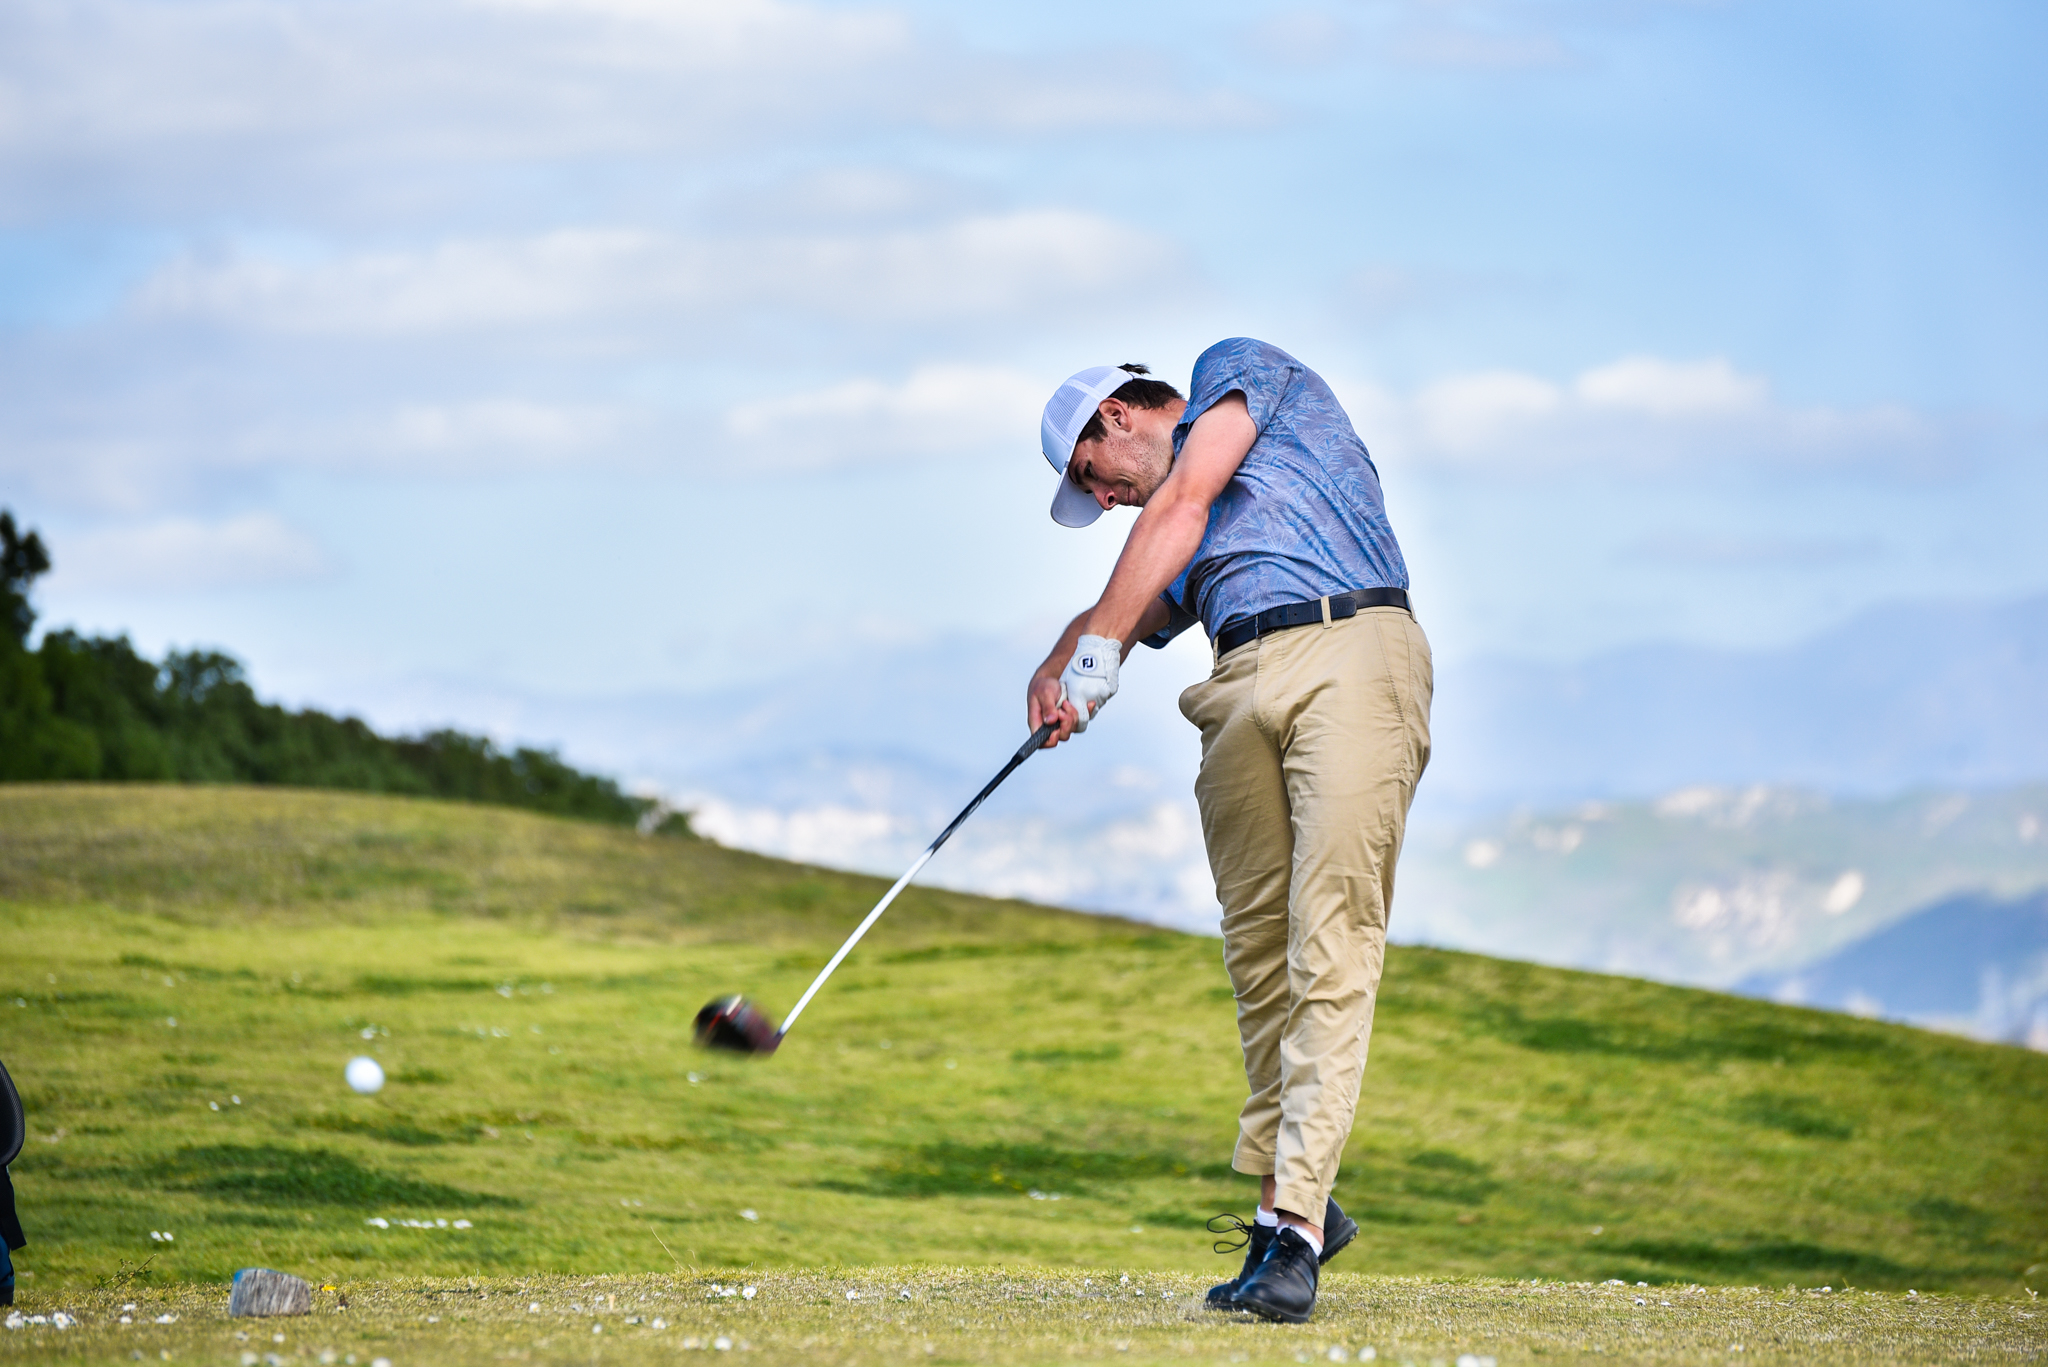 College of the Canyons freshman Alex Moores shot a one-over-par round of 73 during Western State Conference (WSC) No. 2 on Monday at River Ridge Golf Course to tie with teammate Dom De Luca for tourney medalist honors. —Mari Kneisel/COC Sports Information